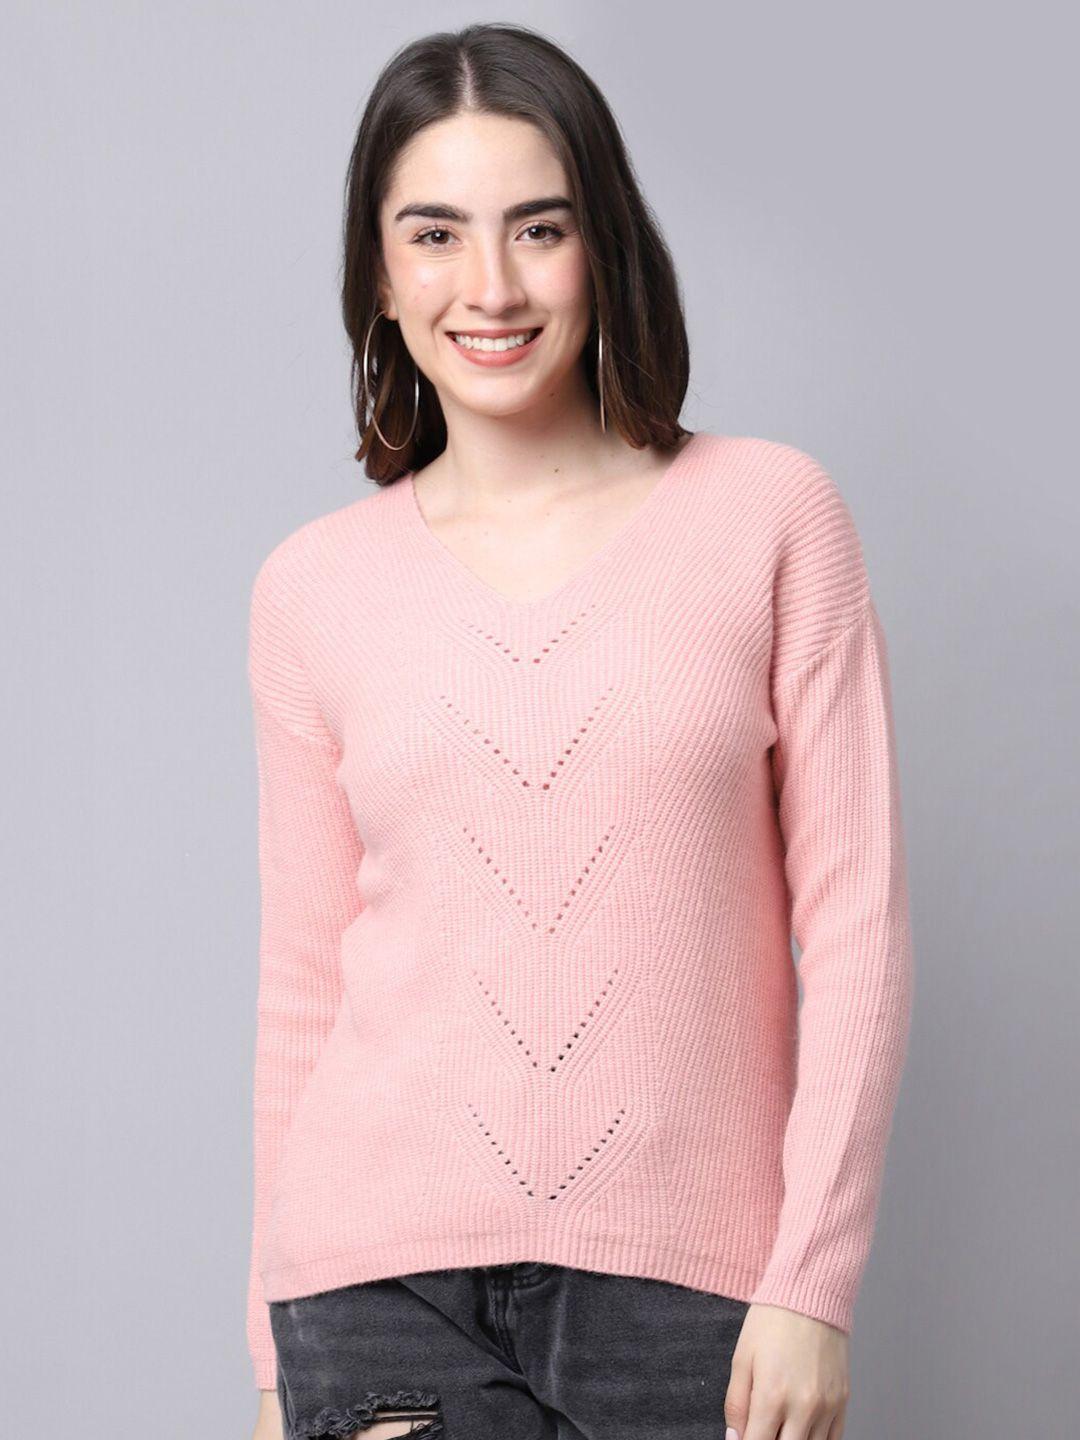 tag 7 open knit v-neck long sleeves knitted pullover sweater